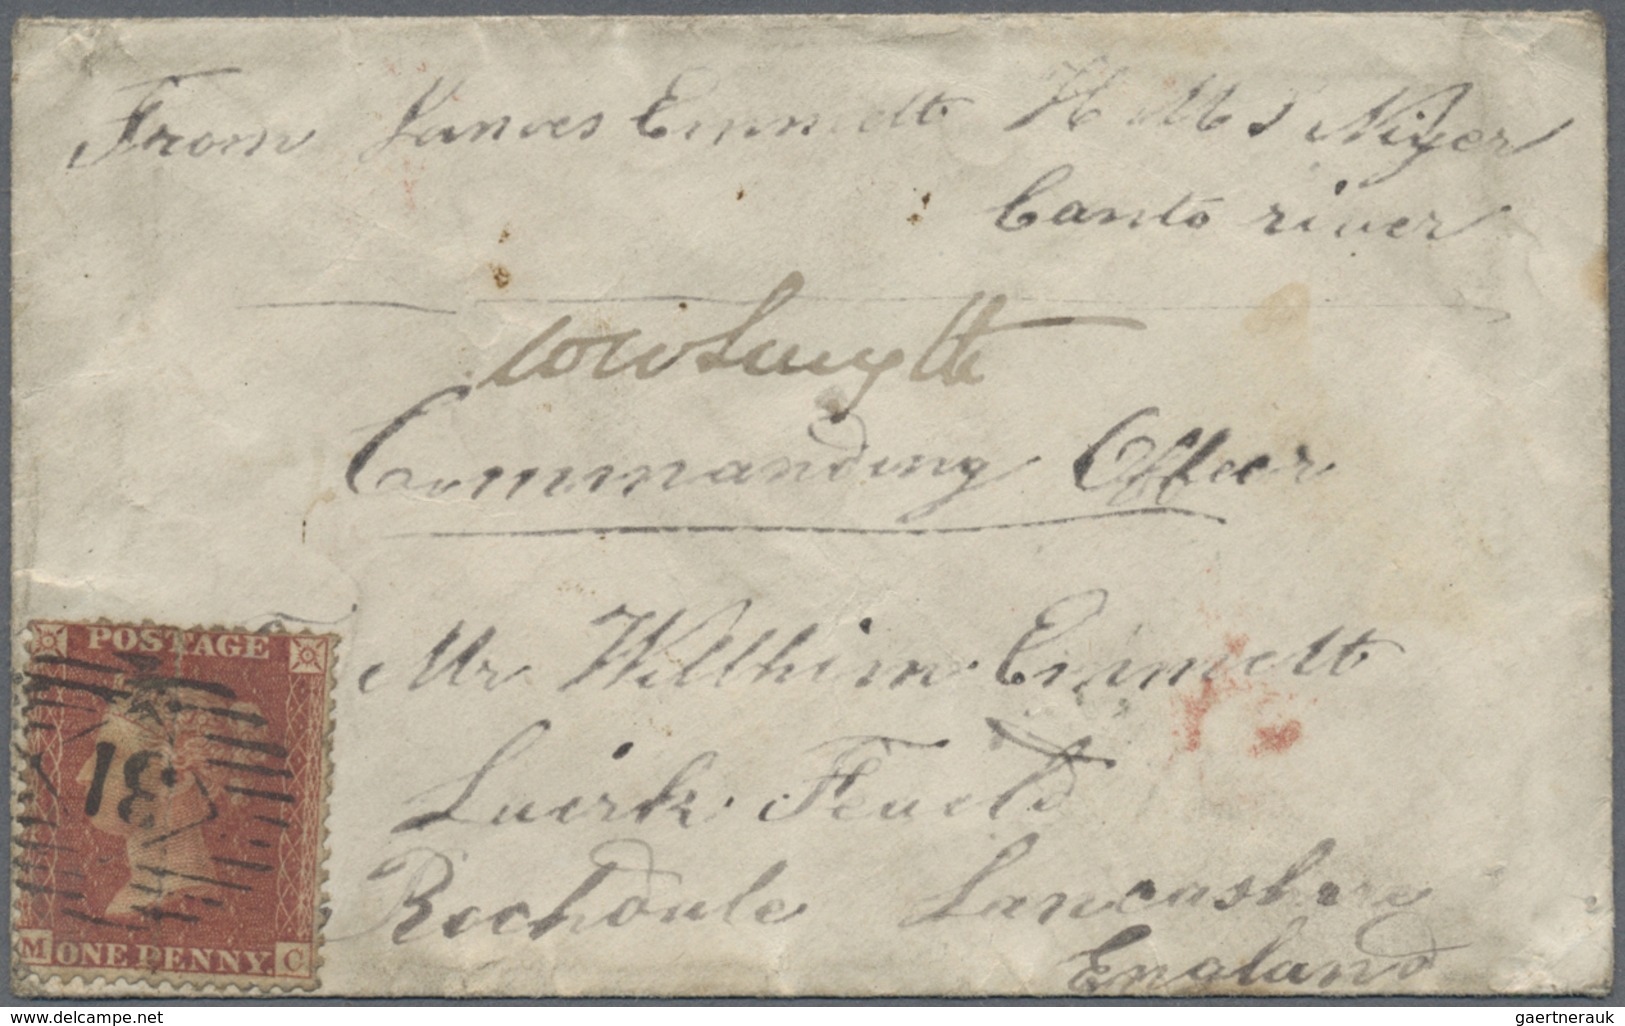 Br China: 1857-58 Correspondence from and to James Emmett on board H.M.S. "Niger" at CANTON RIVER and i